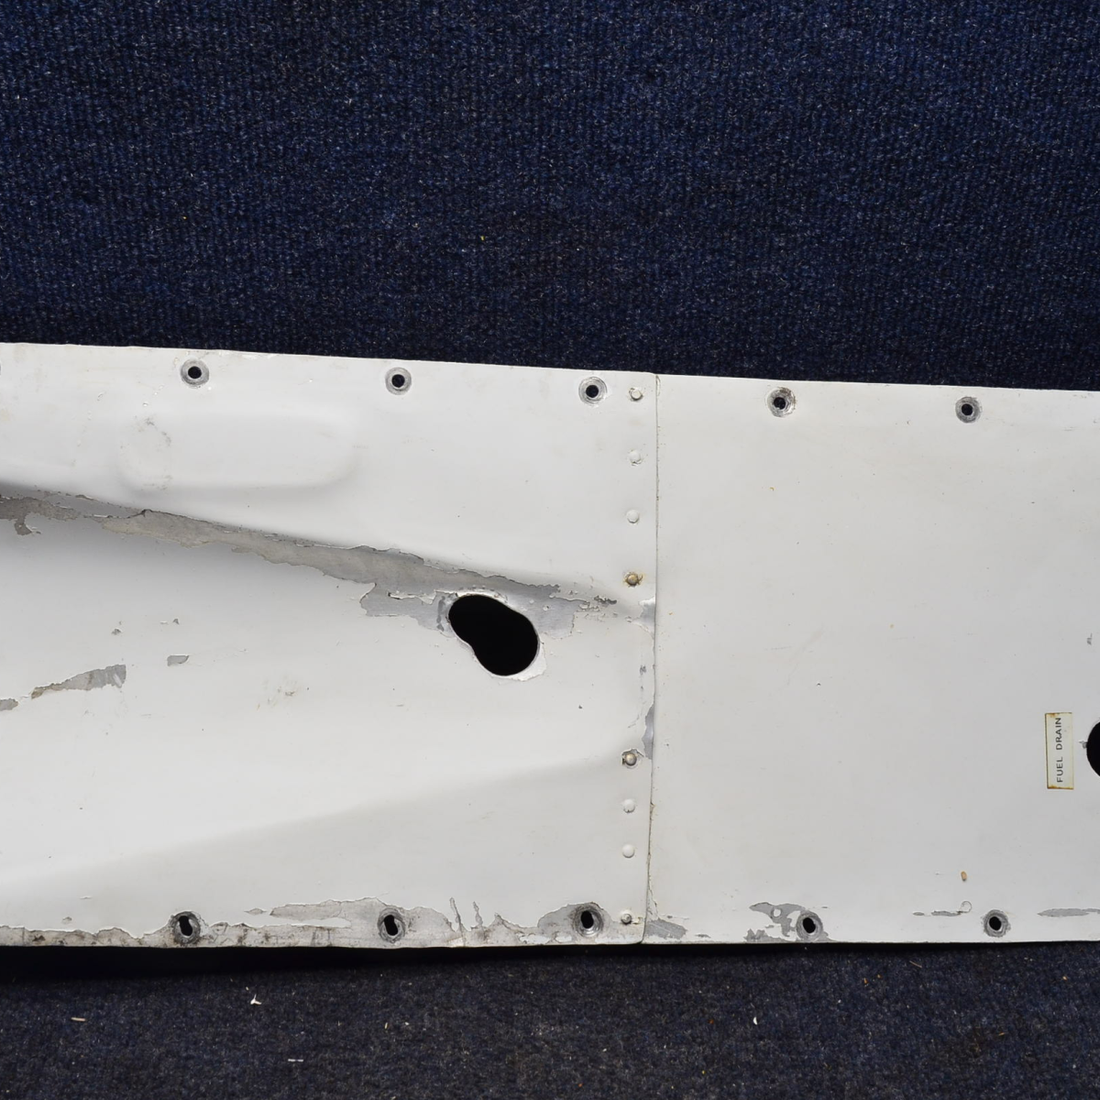 Used aircraft parts for sale, 630100-501 Mooney  [part_model] Mooney M20J EXHAUST CAVITY LH